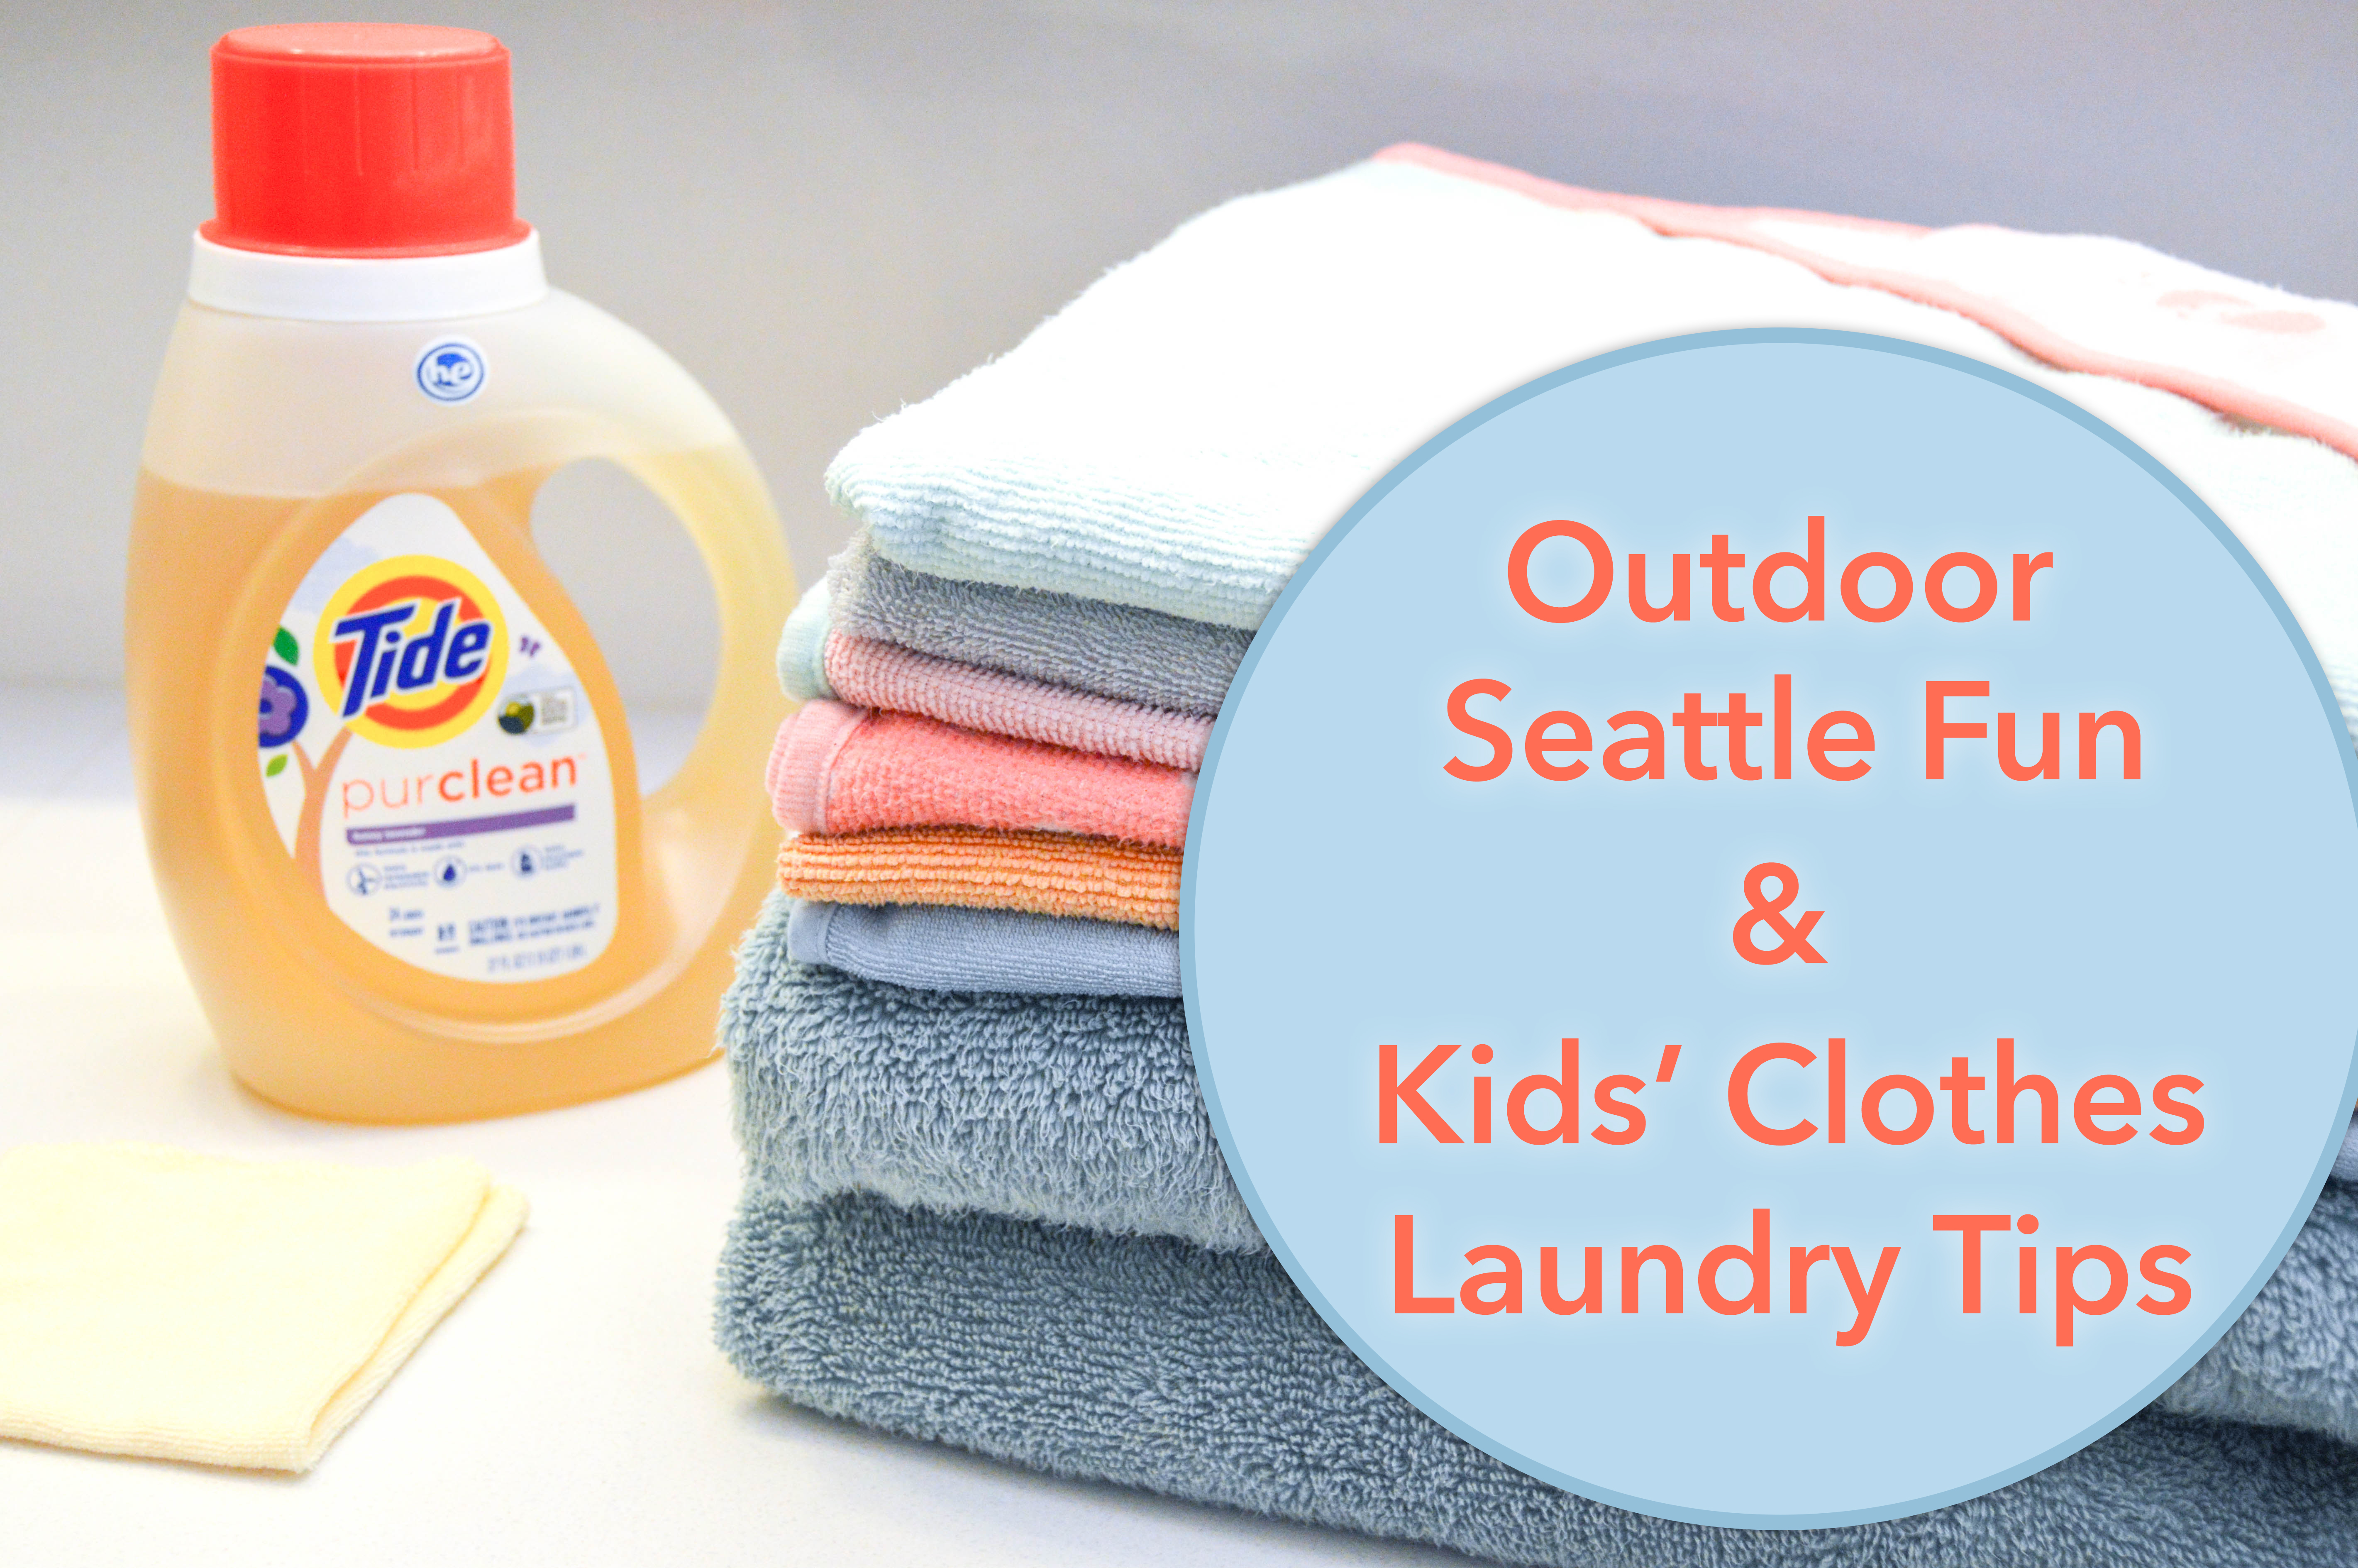 Outdoor Seattle Fun & Kids' Clothes Laundry Tips. Top six fun outdoor spots in Seattle to take our kids to play. Also sharing laundry tips for how we keep our kids' clothes clean with Tide purclean.